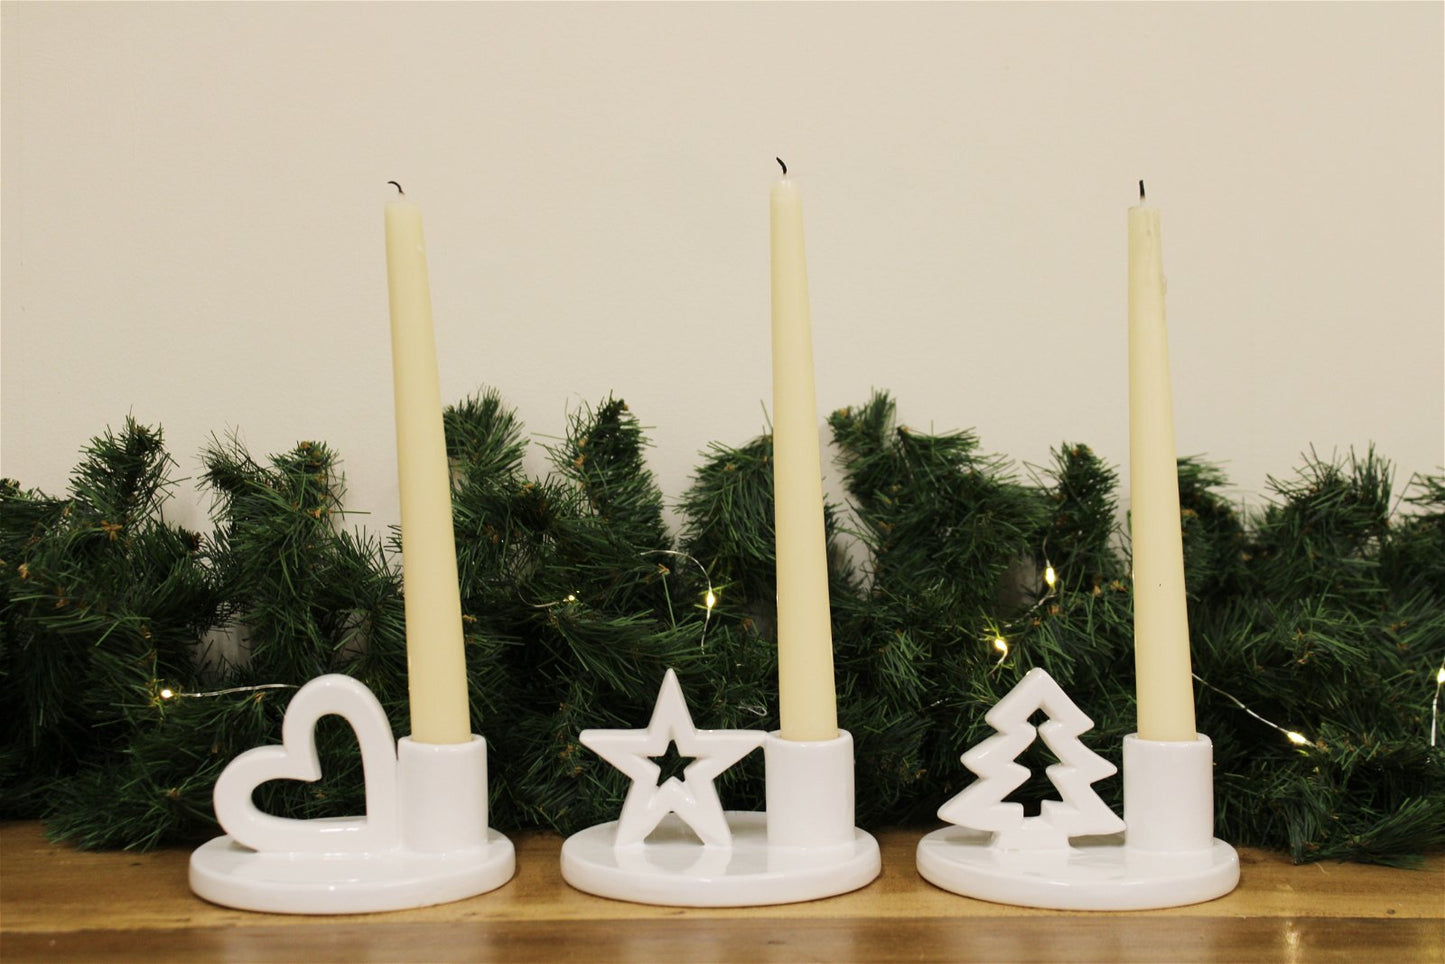 Set of Three Dinner Candle Holders - a Cheeky Plant